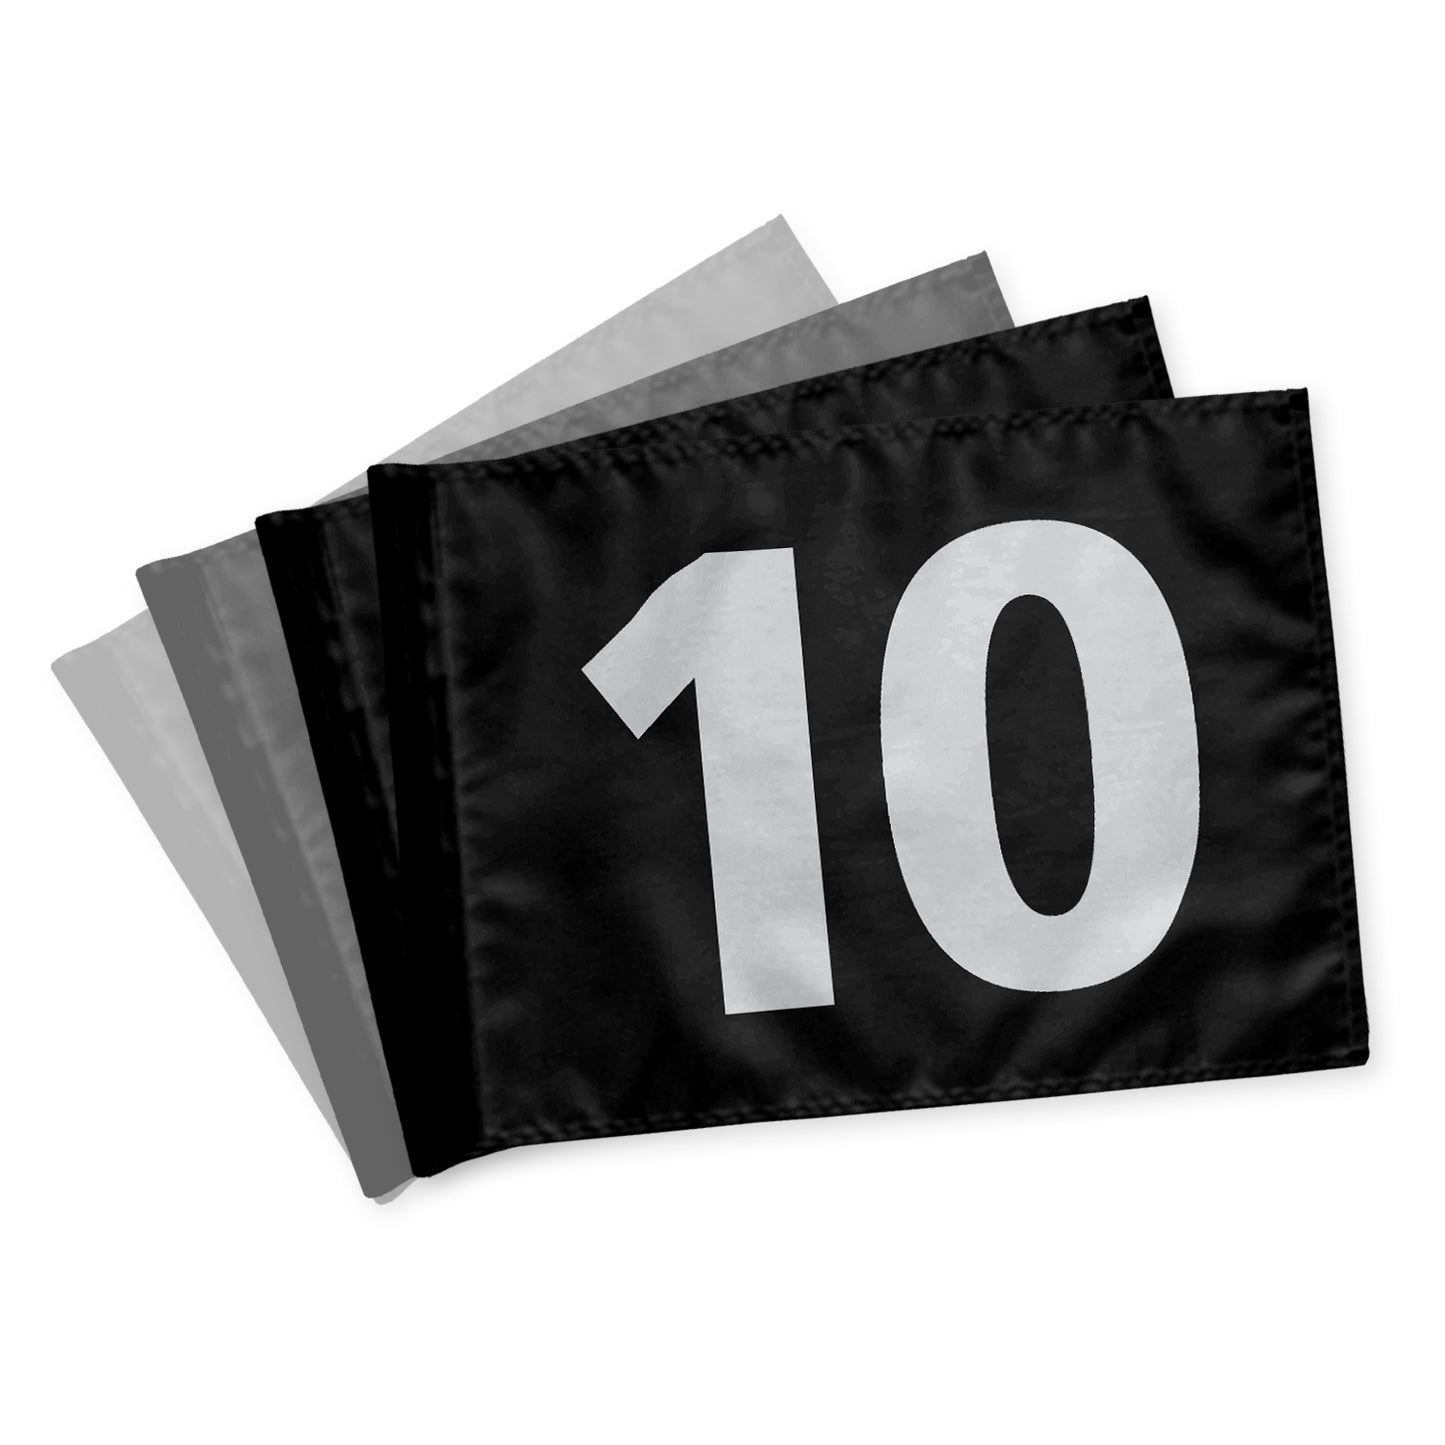 Puttinggreenflags 10-18, stiffened,  black with white numbers, 200 gram fabric